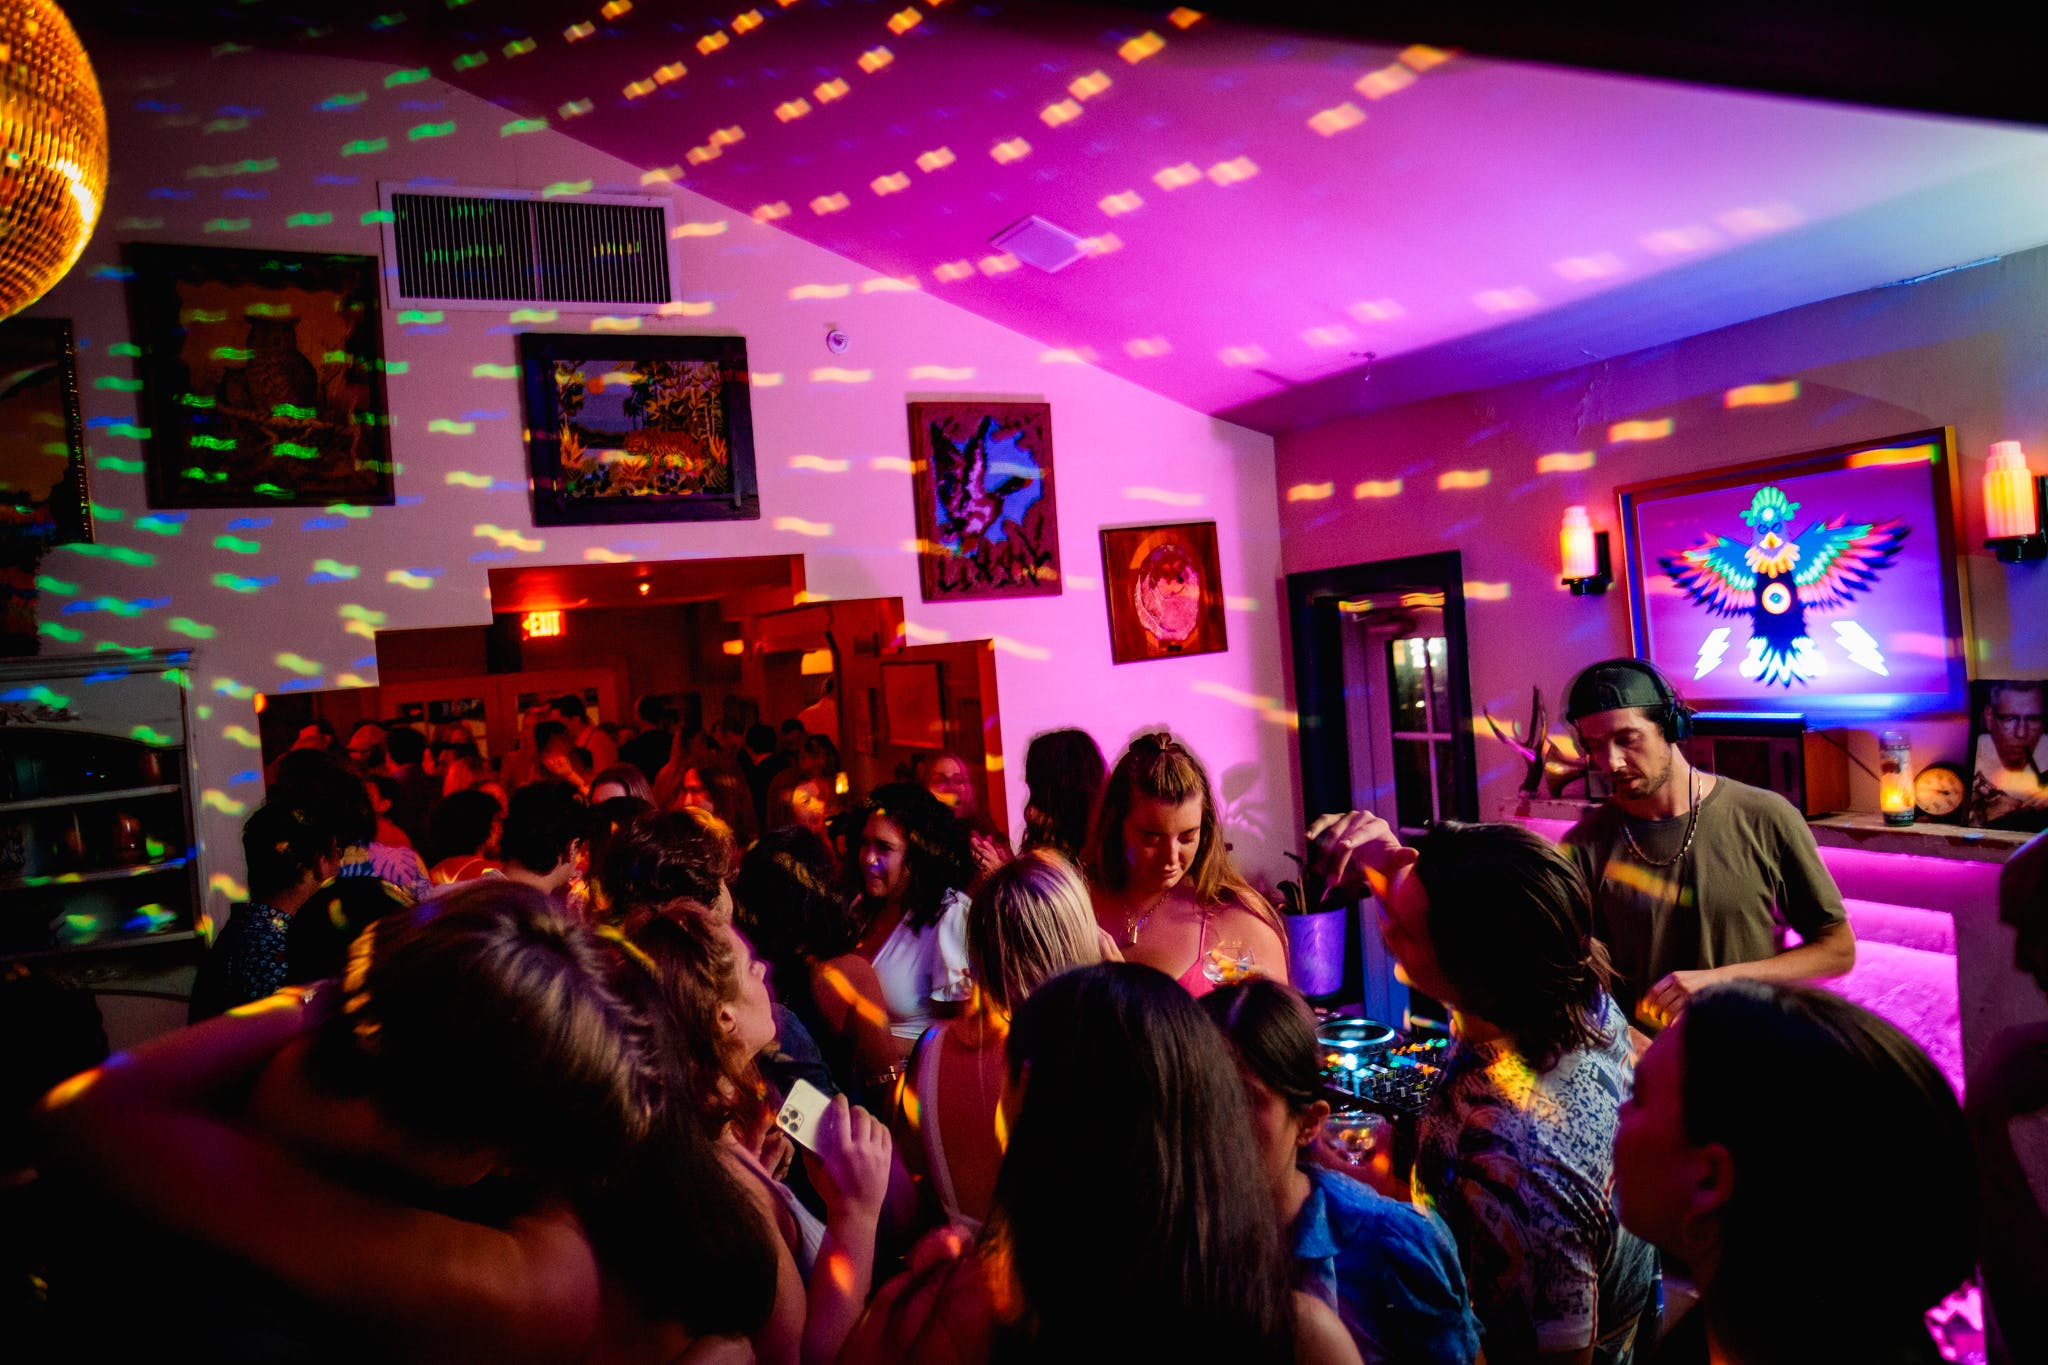 Where To Go When You Want To Dance But Hate Clubs - Miami - The